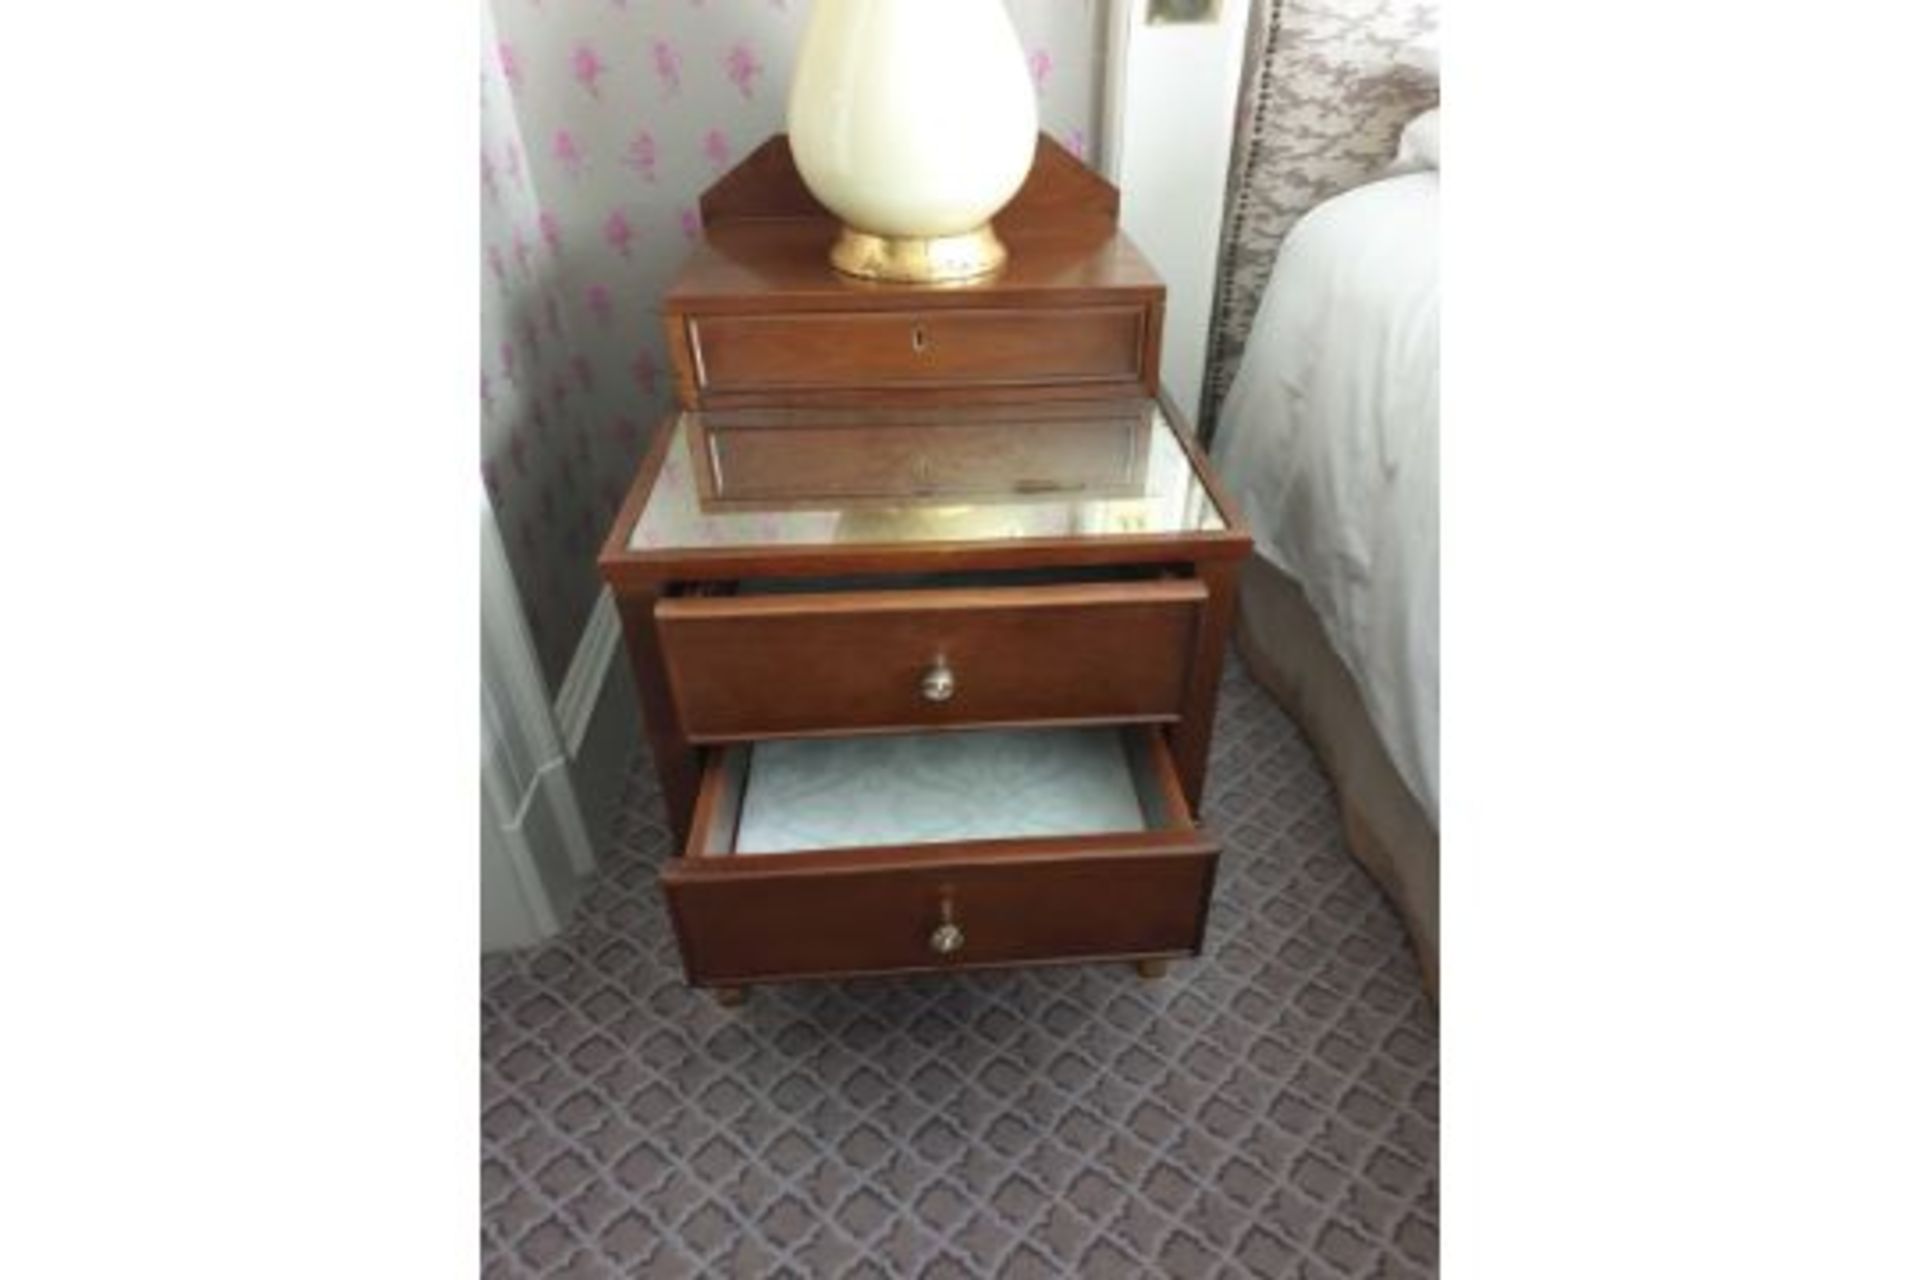 A Pair Of Two Tier Bedside Nightstands With Antiqued Plate Top With Storage Compartments Mounted - Bild 2 aus 3